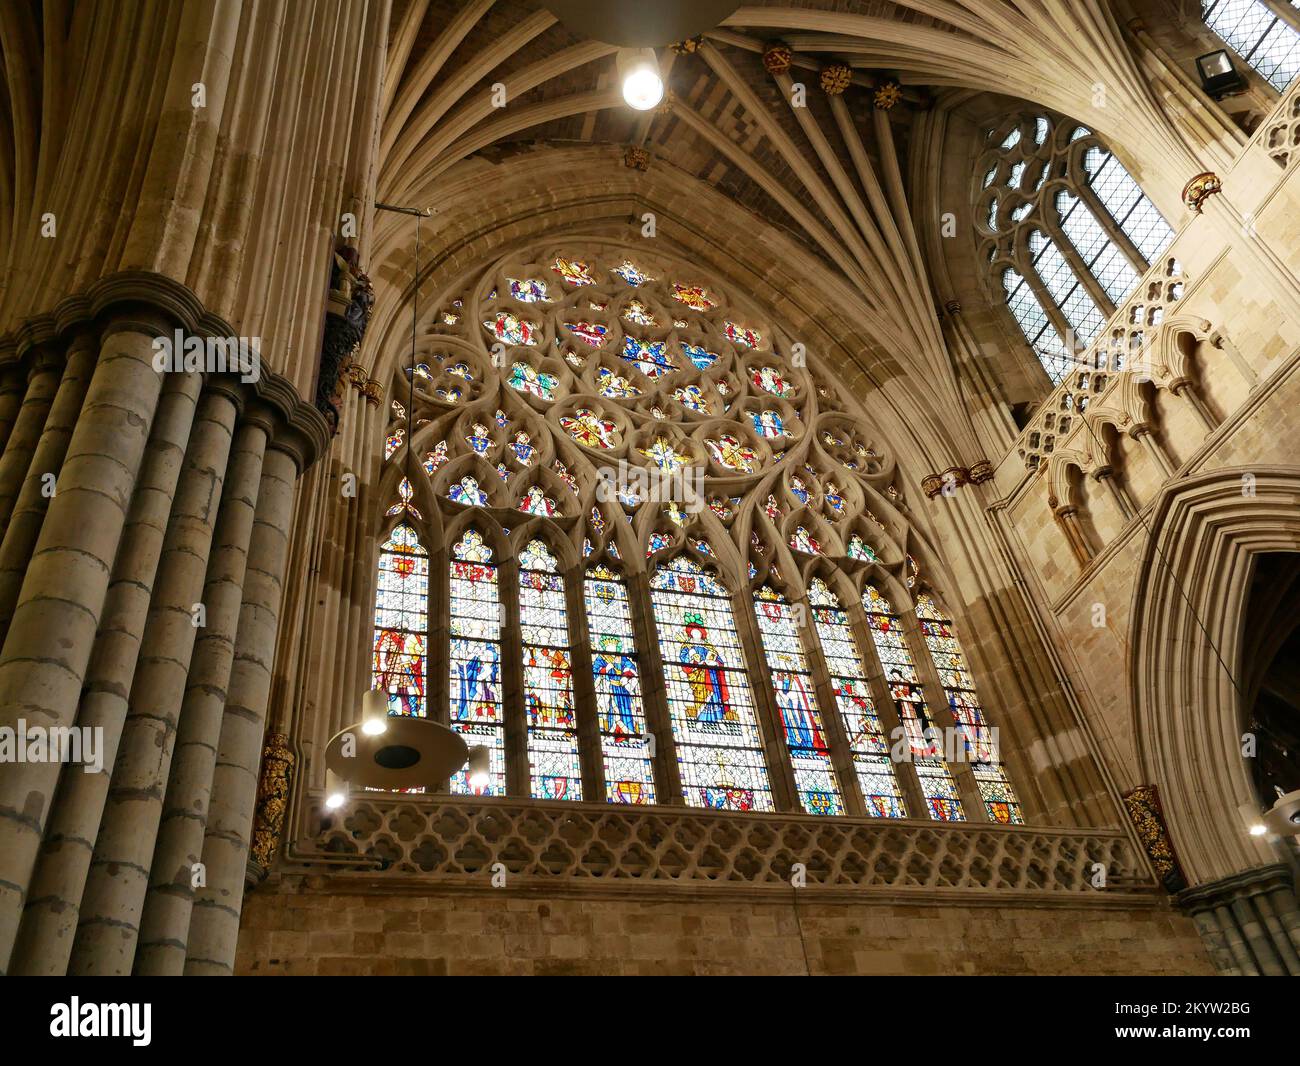 Exeter Cathedral interior Stock Photo